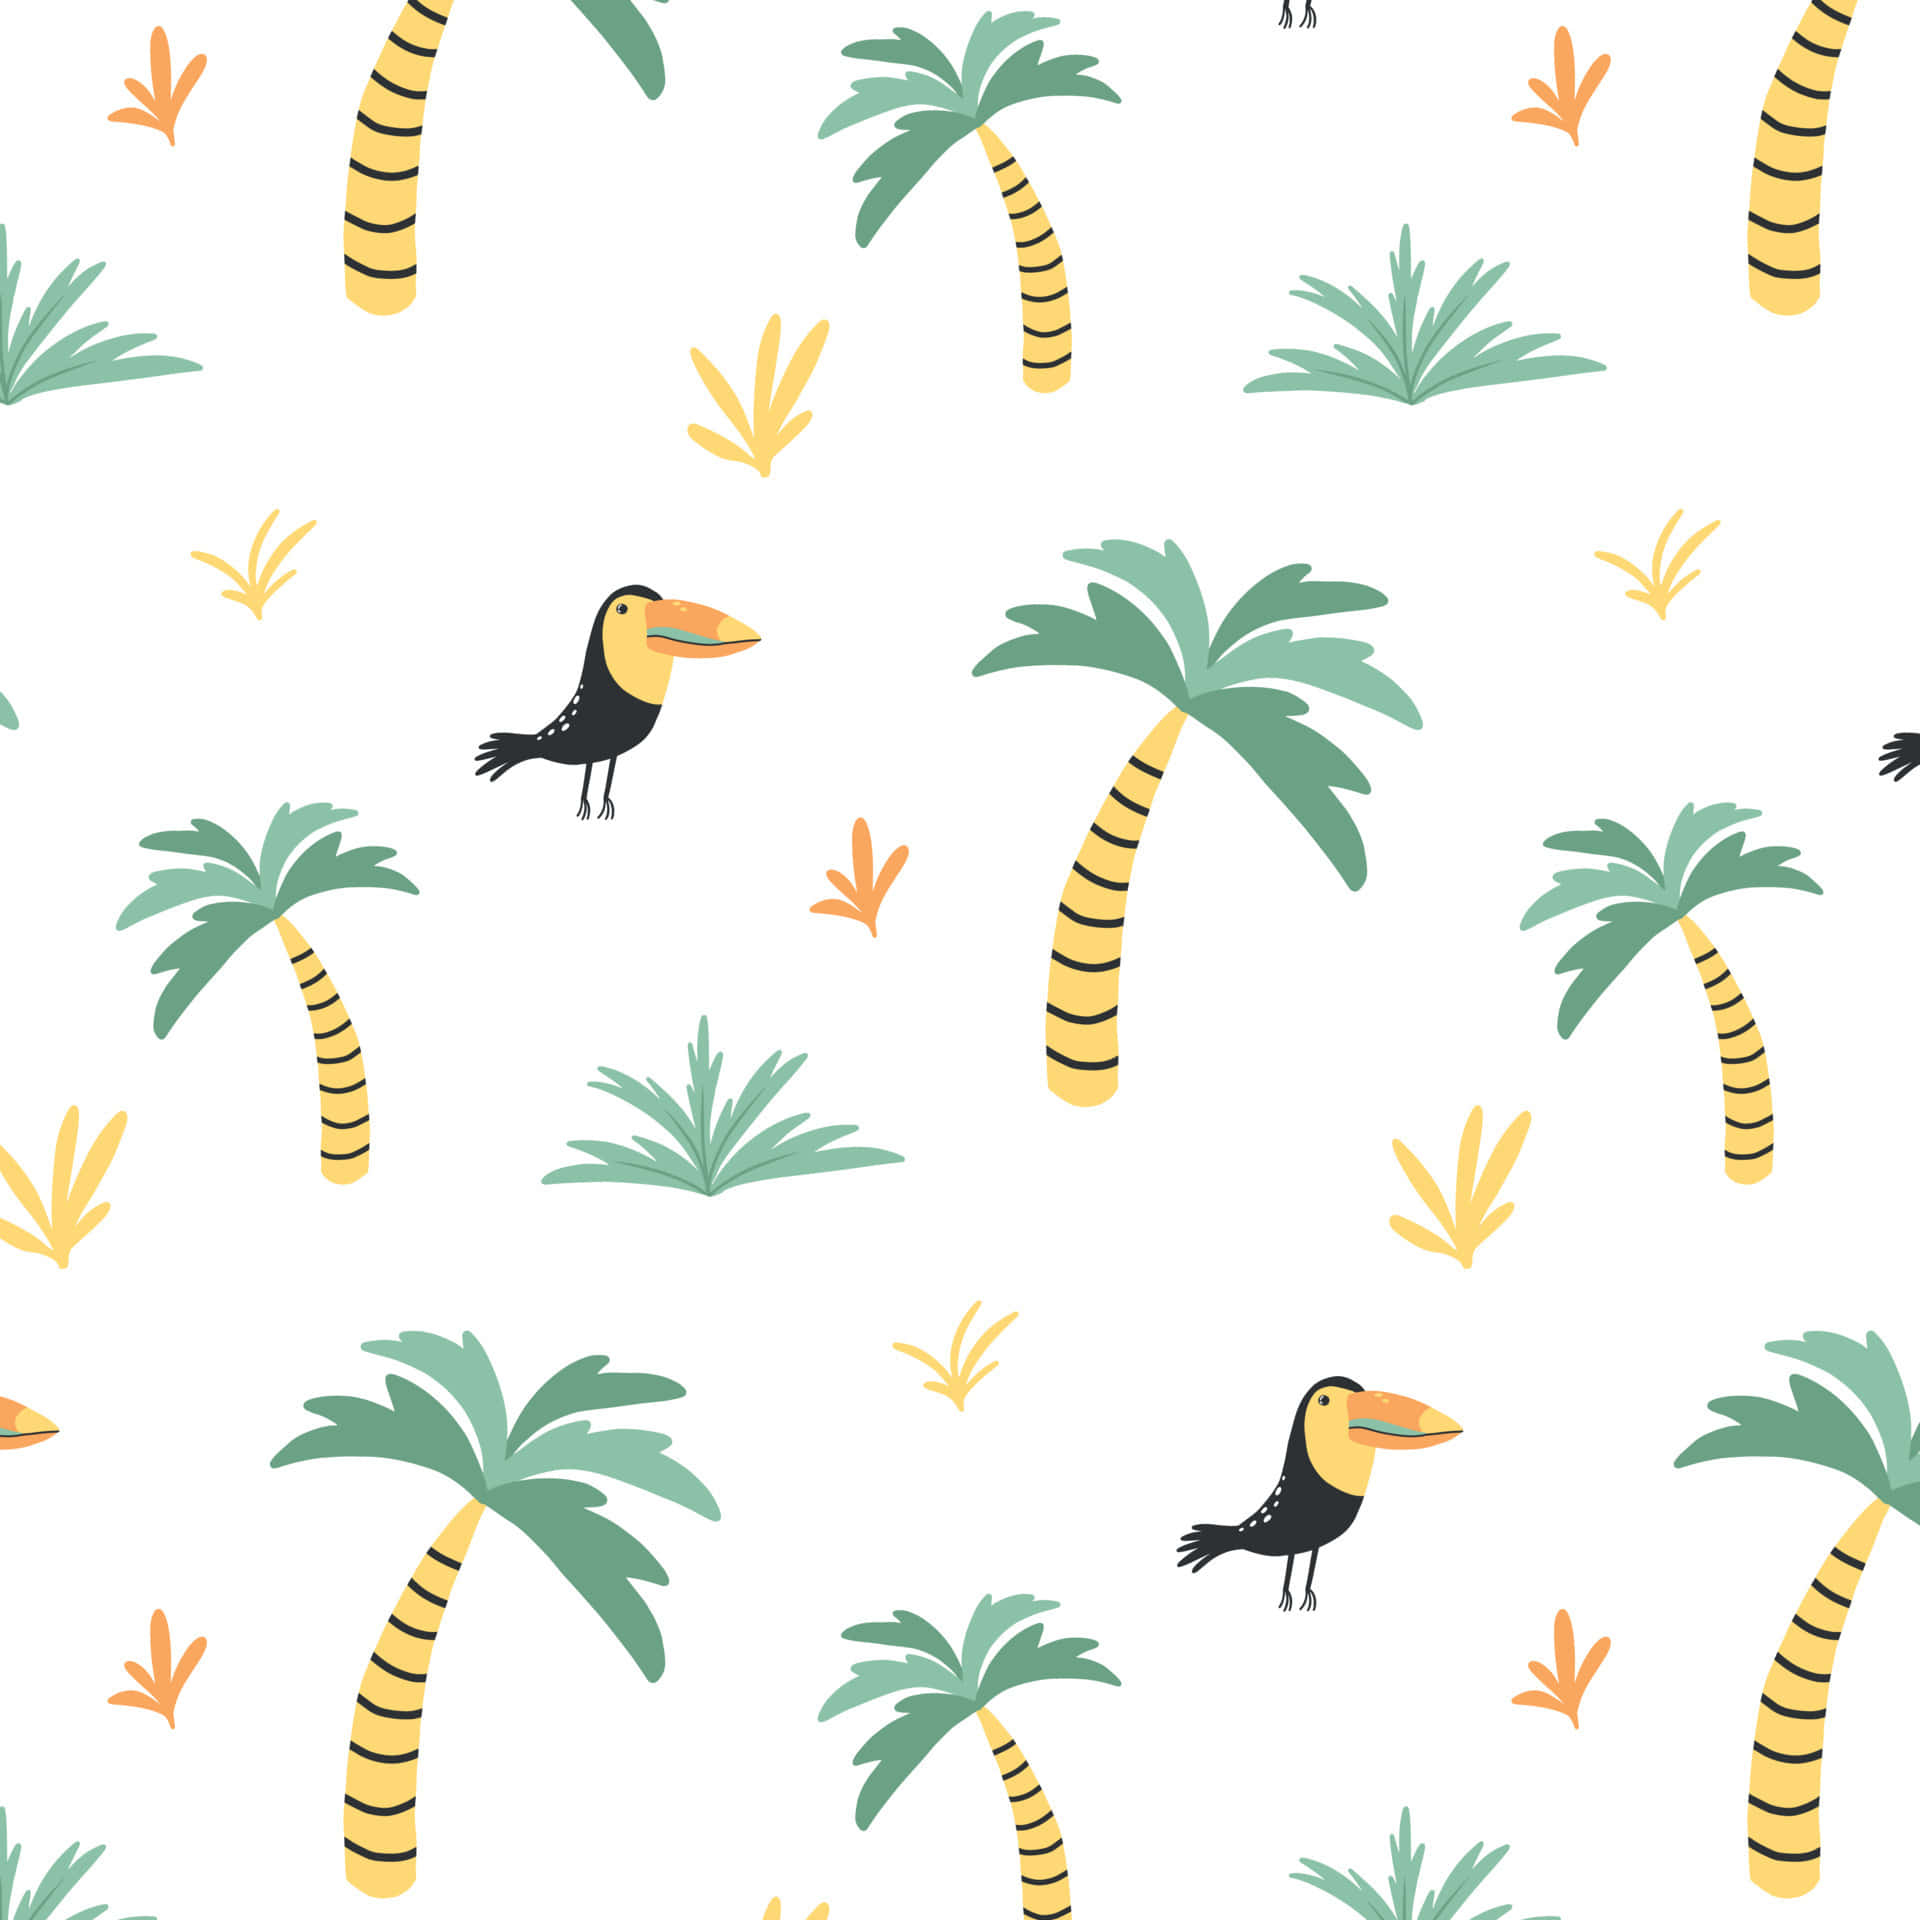 Feel the Warmth of the Summer Sun with a Cute Palm Tree Wallpaper